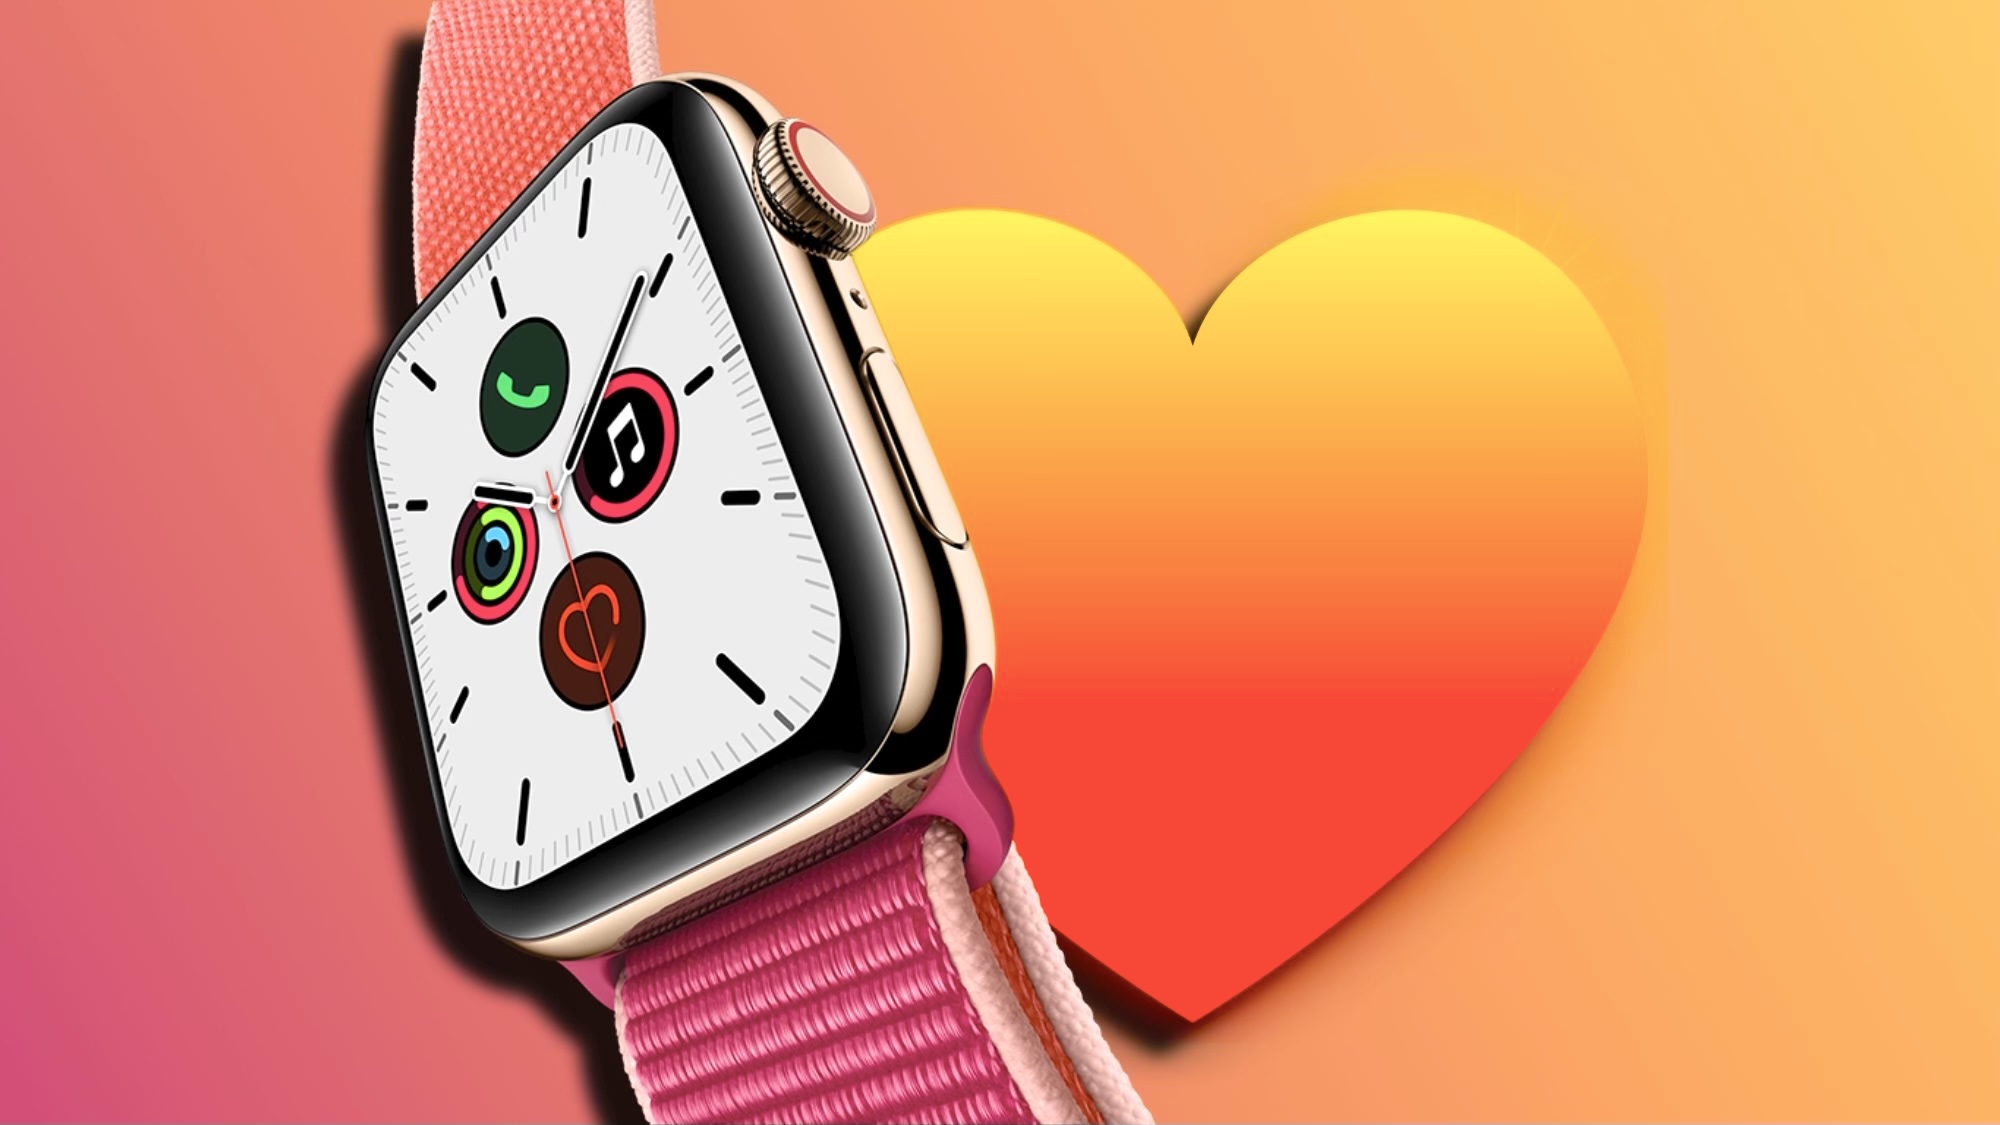 The Apple Watch saves another life: timely detection is key